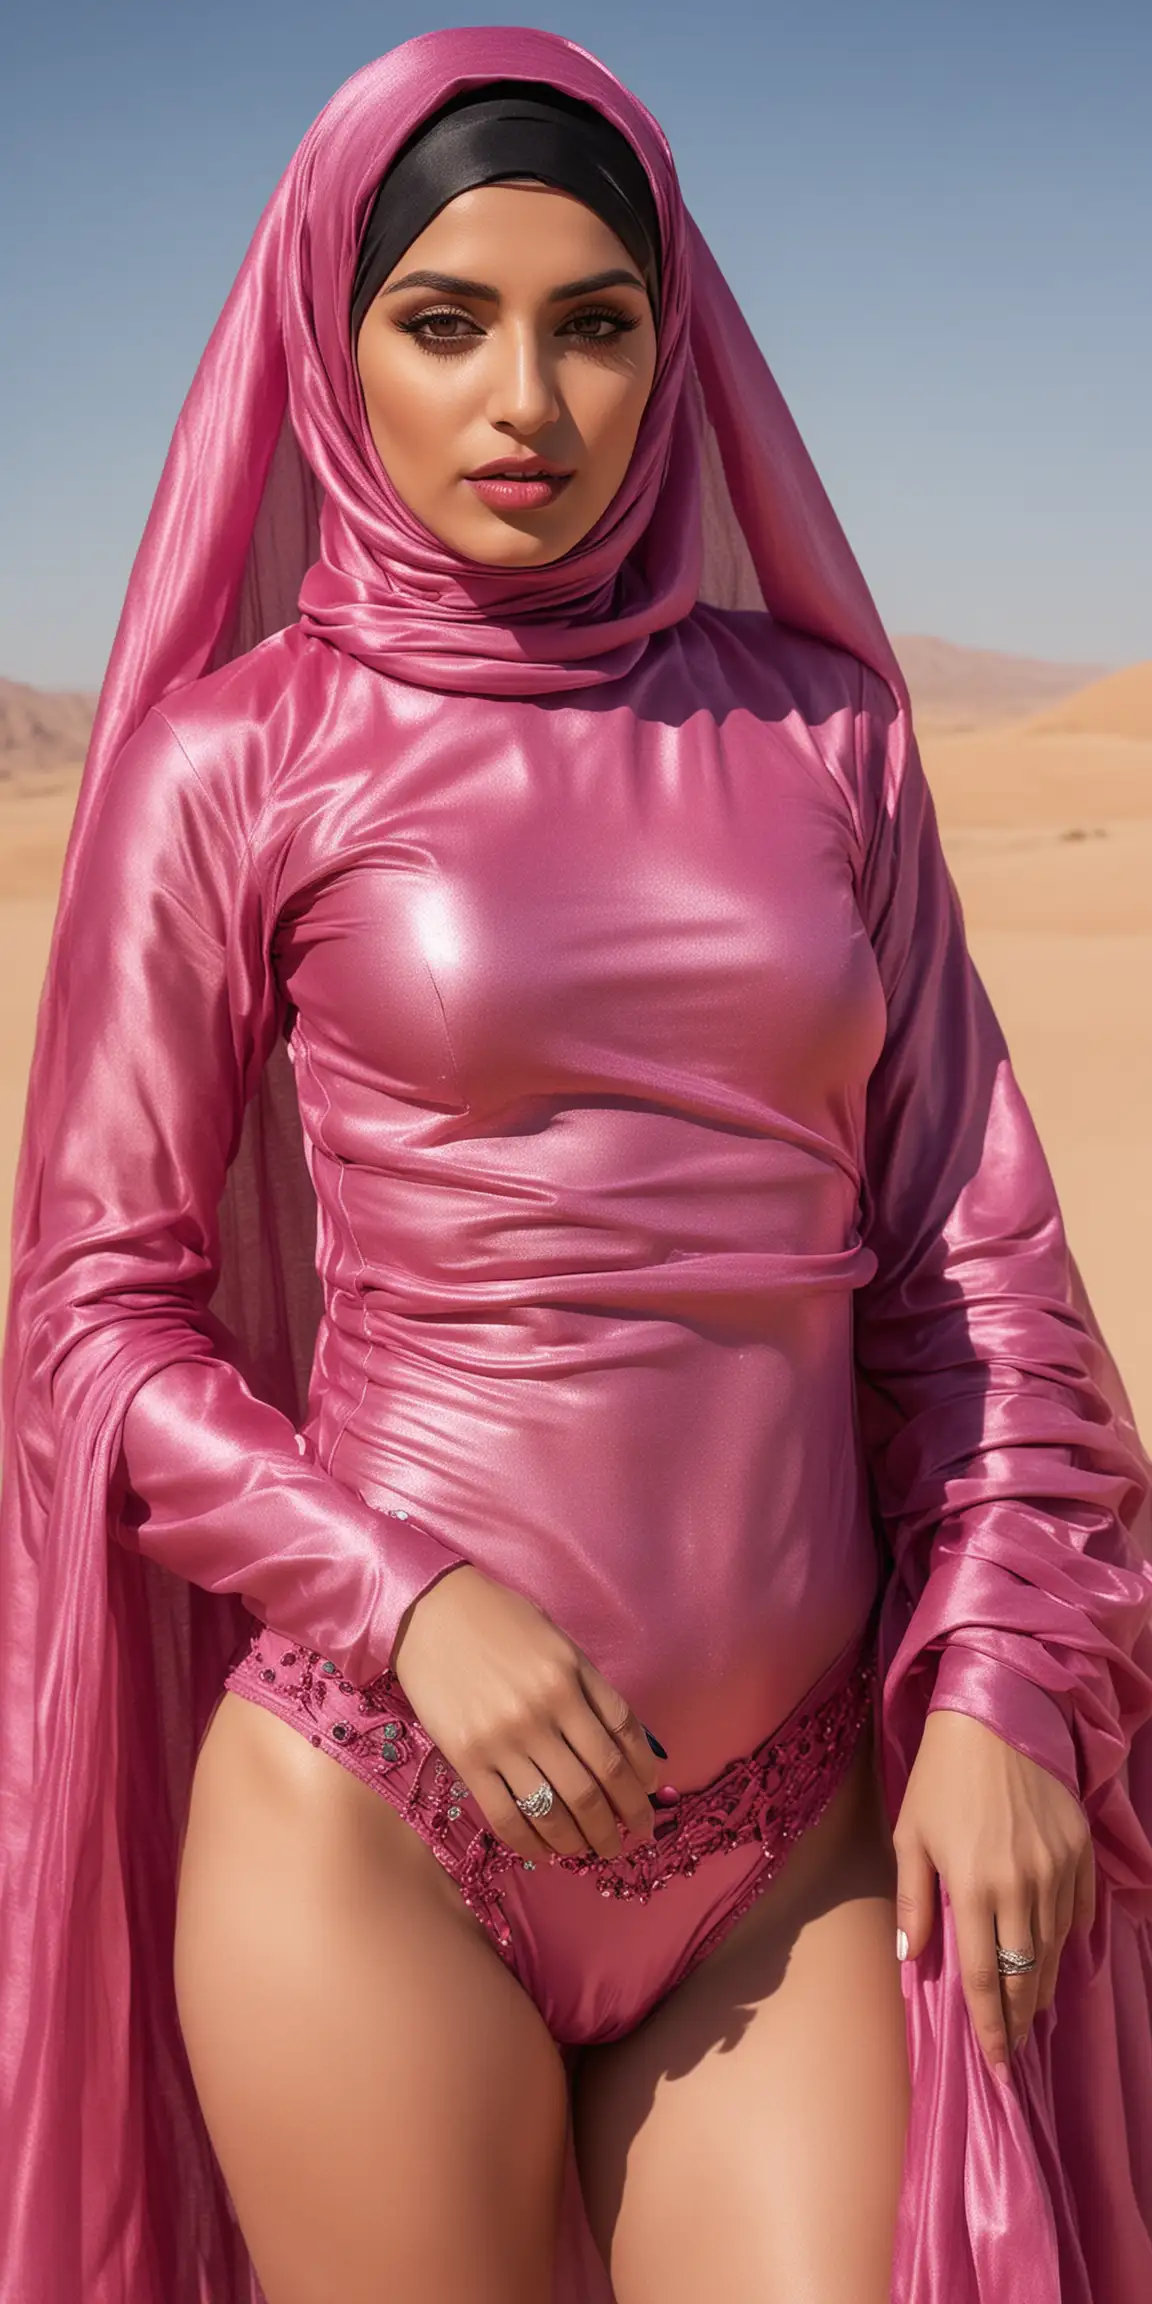 Remote luxury desert oasis. Newlywed, Fair-skinned, shy, big-breasted Niqabi Arab Muslimah in heavy gaudy bridal lipstick makeup & jewellery and 5” patent leather Louboutin heels is wearing a magenta shiny lustrous metallic chiffon skimpy-bikini with a metallic niqab long, loose, drapey fabric *hides her face*.